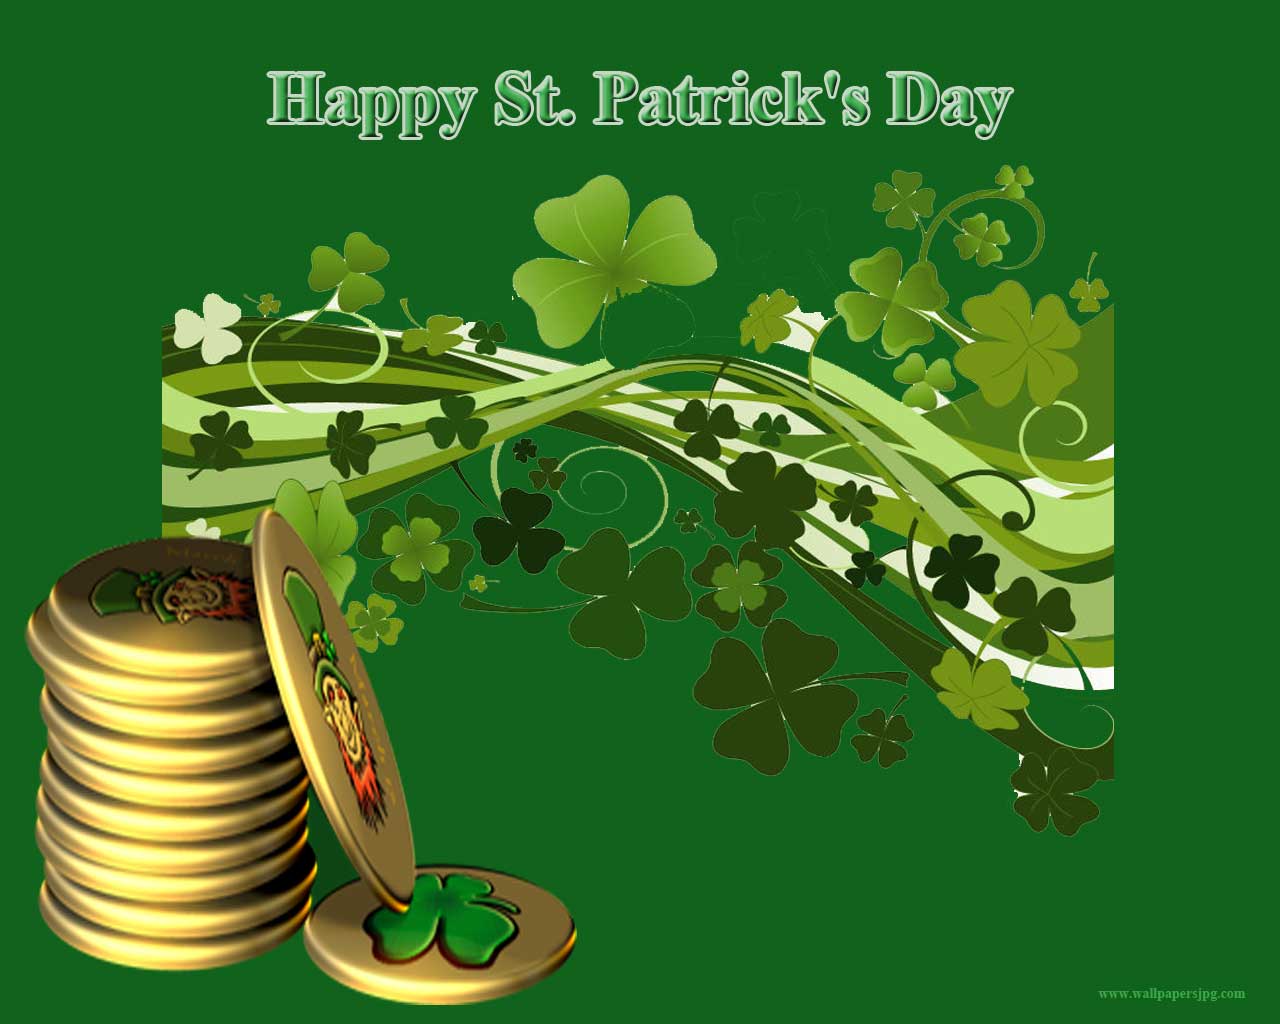 Patrick’s Day Gold Coin Greeting Card Wallpaper - Saint Patrick's Day - HD Wallpaper 